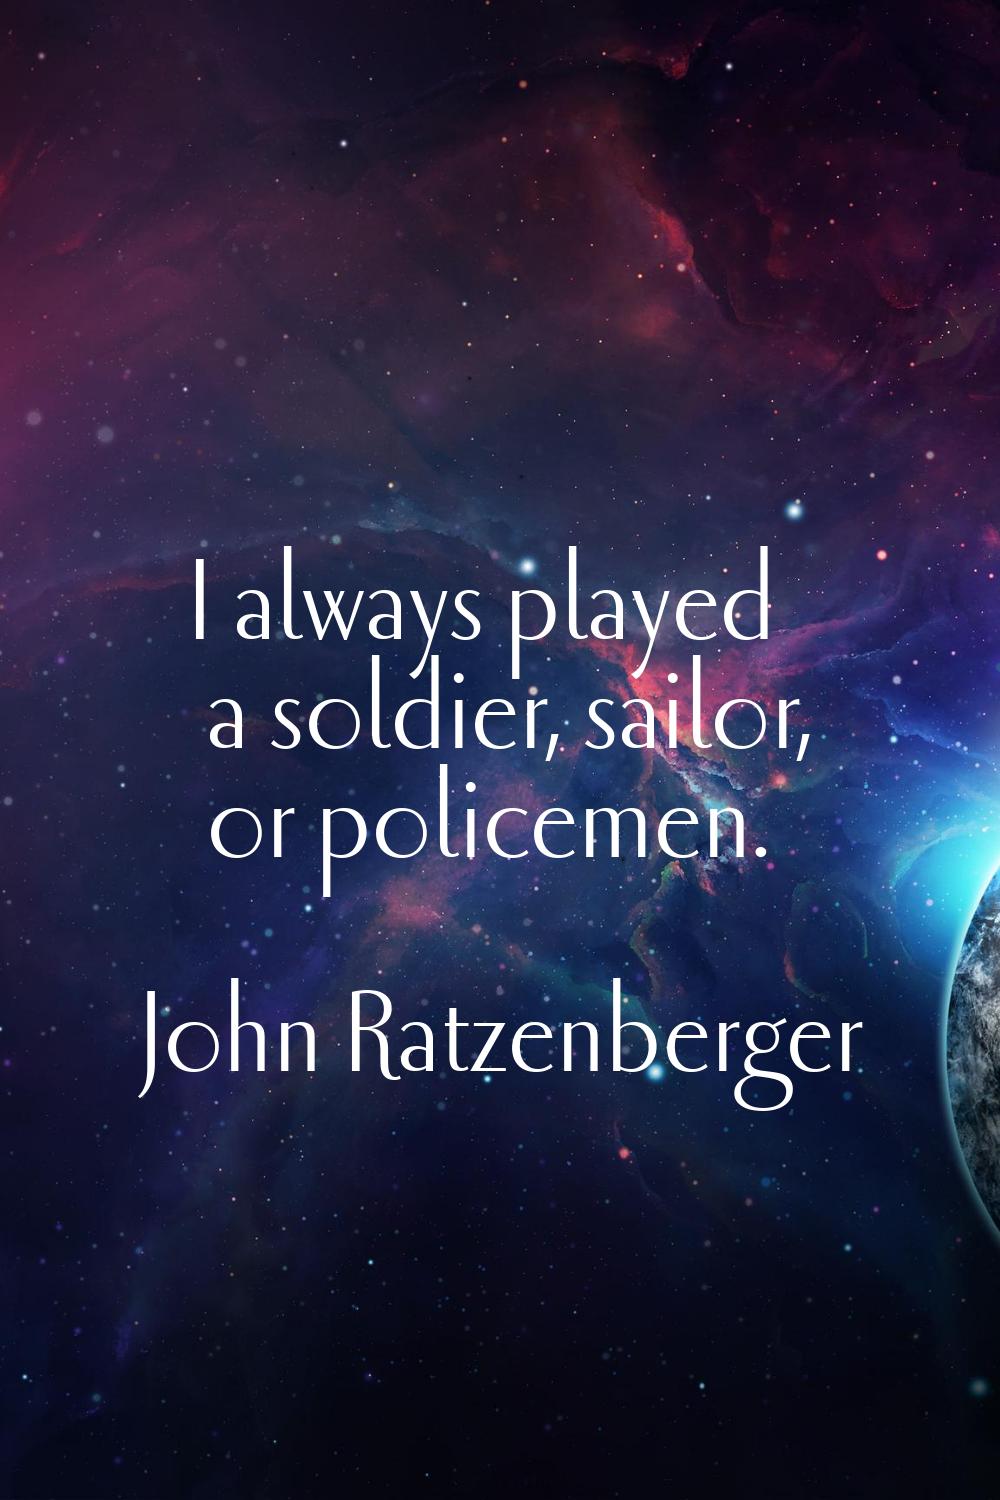 I always played a soldier, sailor, or policemen.